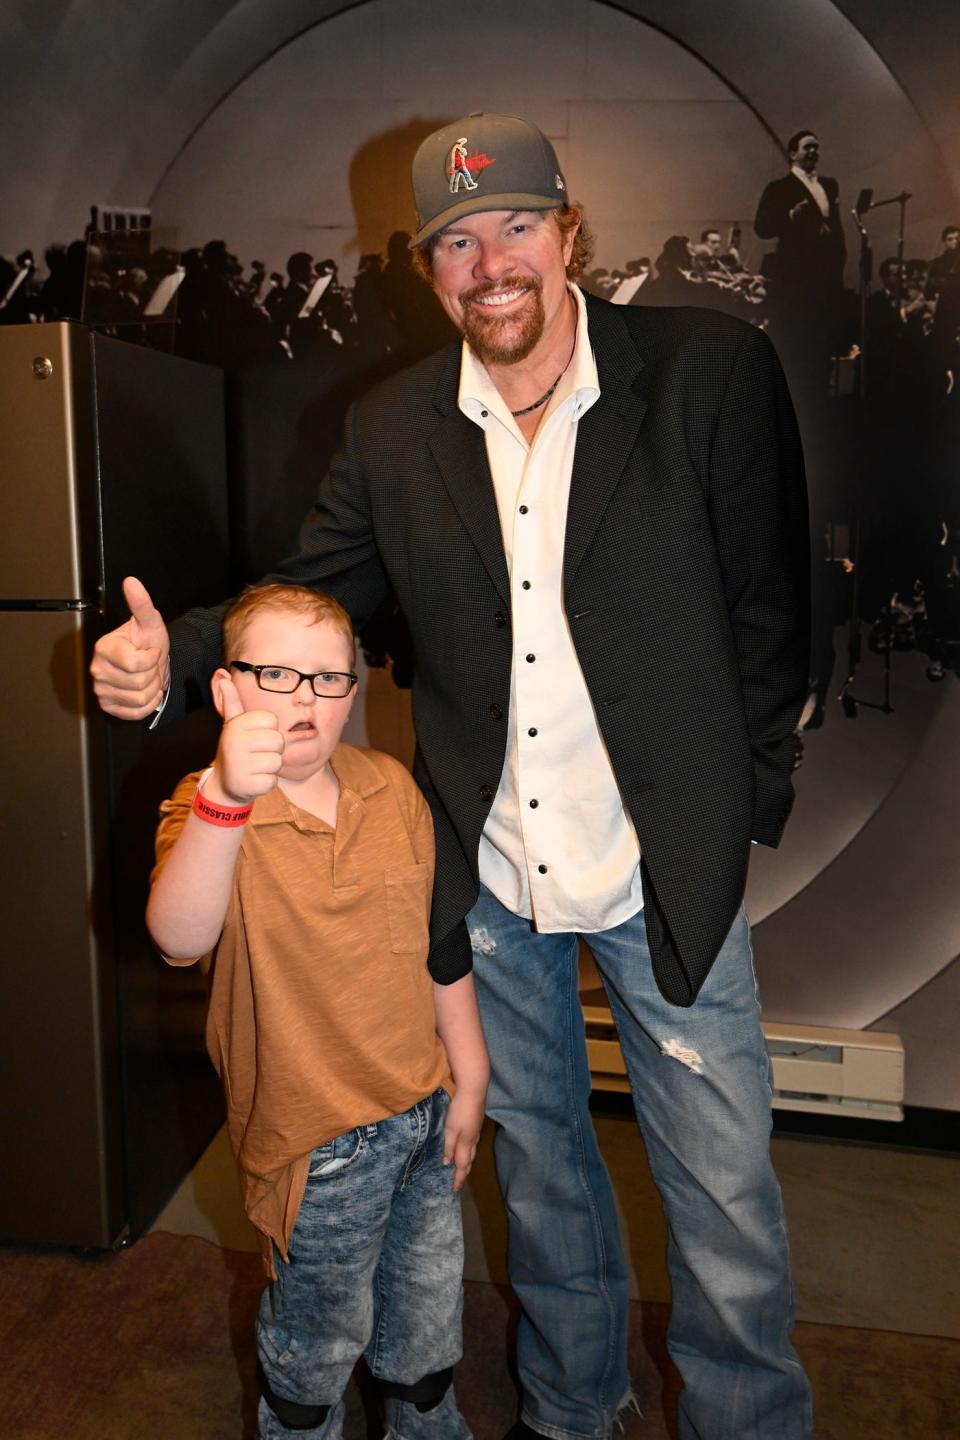 Denton Padgett, a former resident at OK Kids Korral, poses for a photo with country music superstar and OK Kids Korral founder Toby Keith at the 18th annual Toby Keith & Friends Golf Classic May 20 at The Criterion in Oklahoma City.